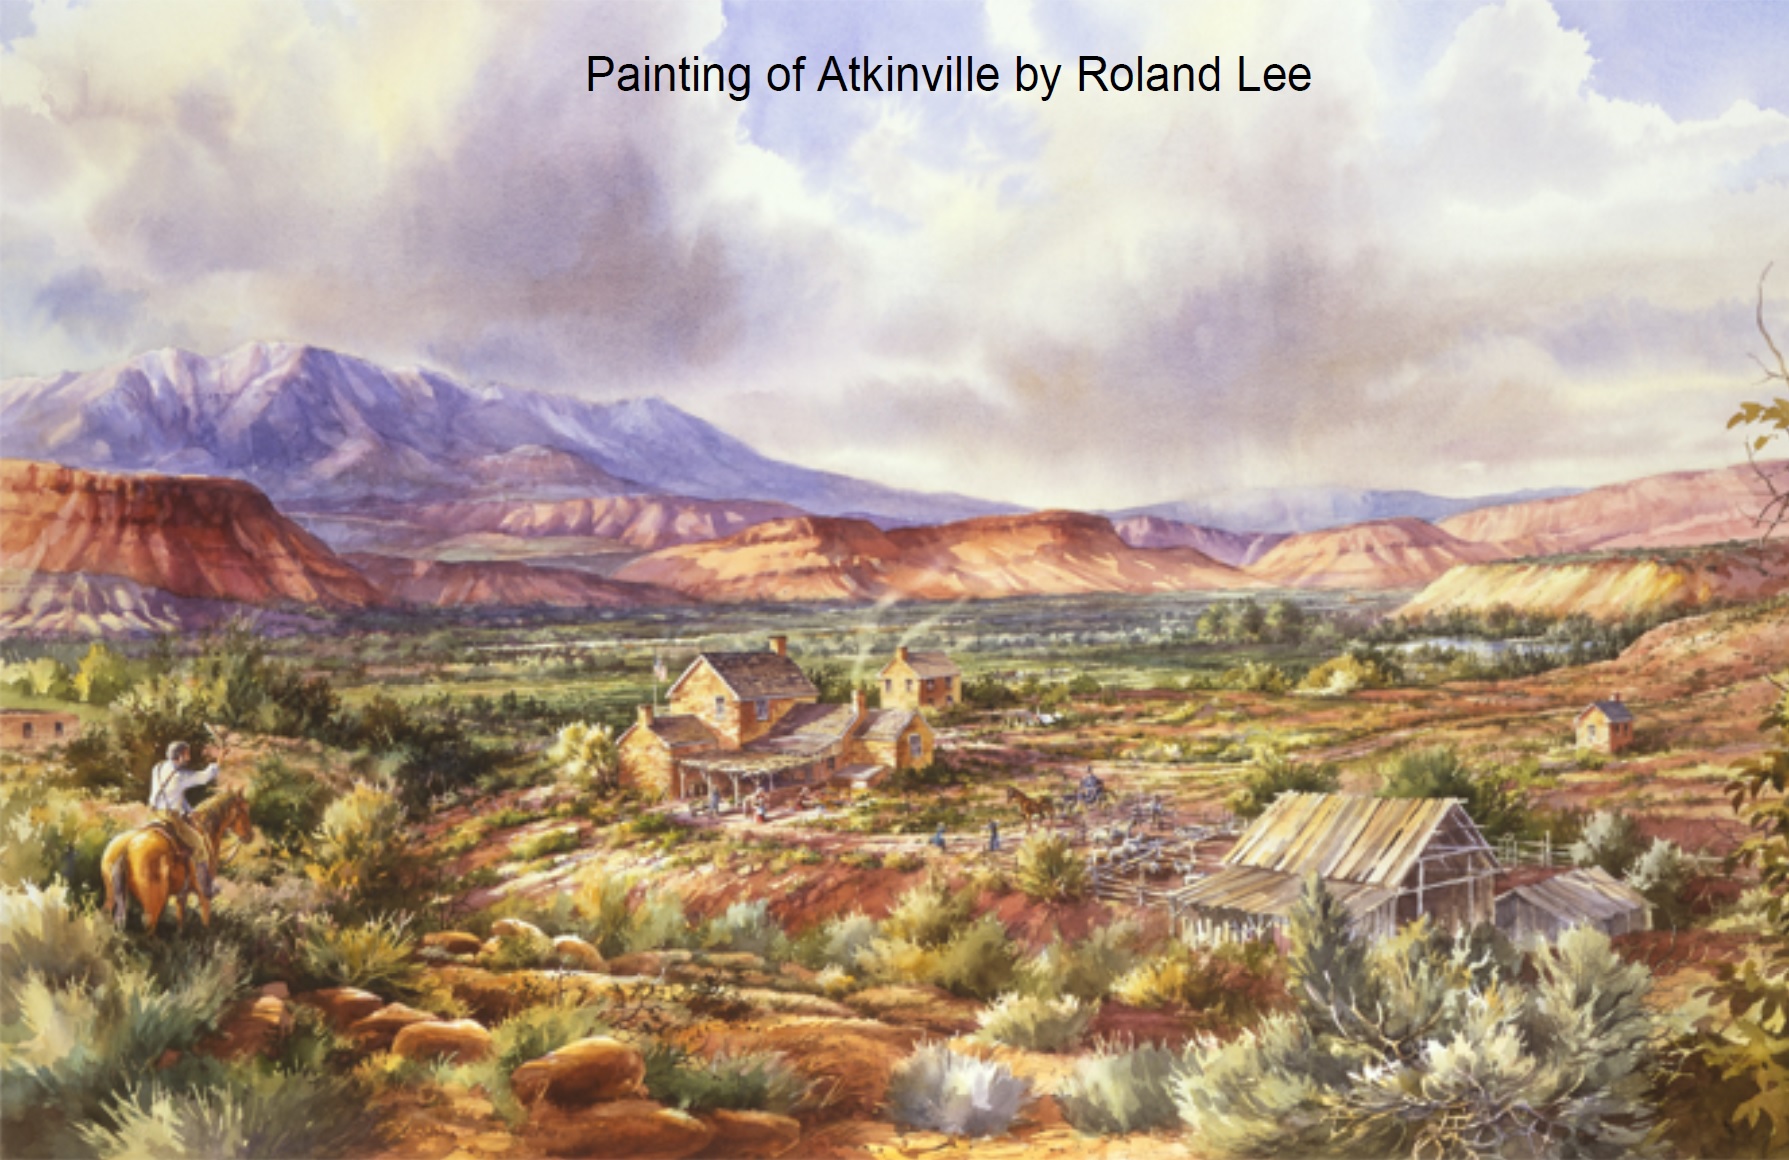 Roland Lee painting of Atkinville